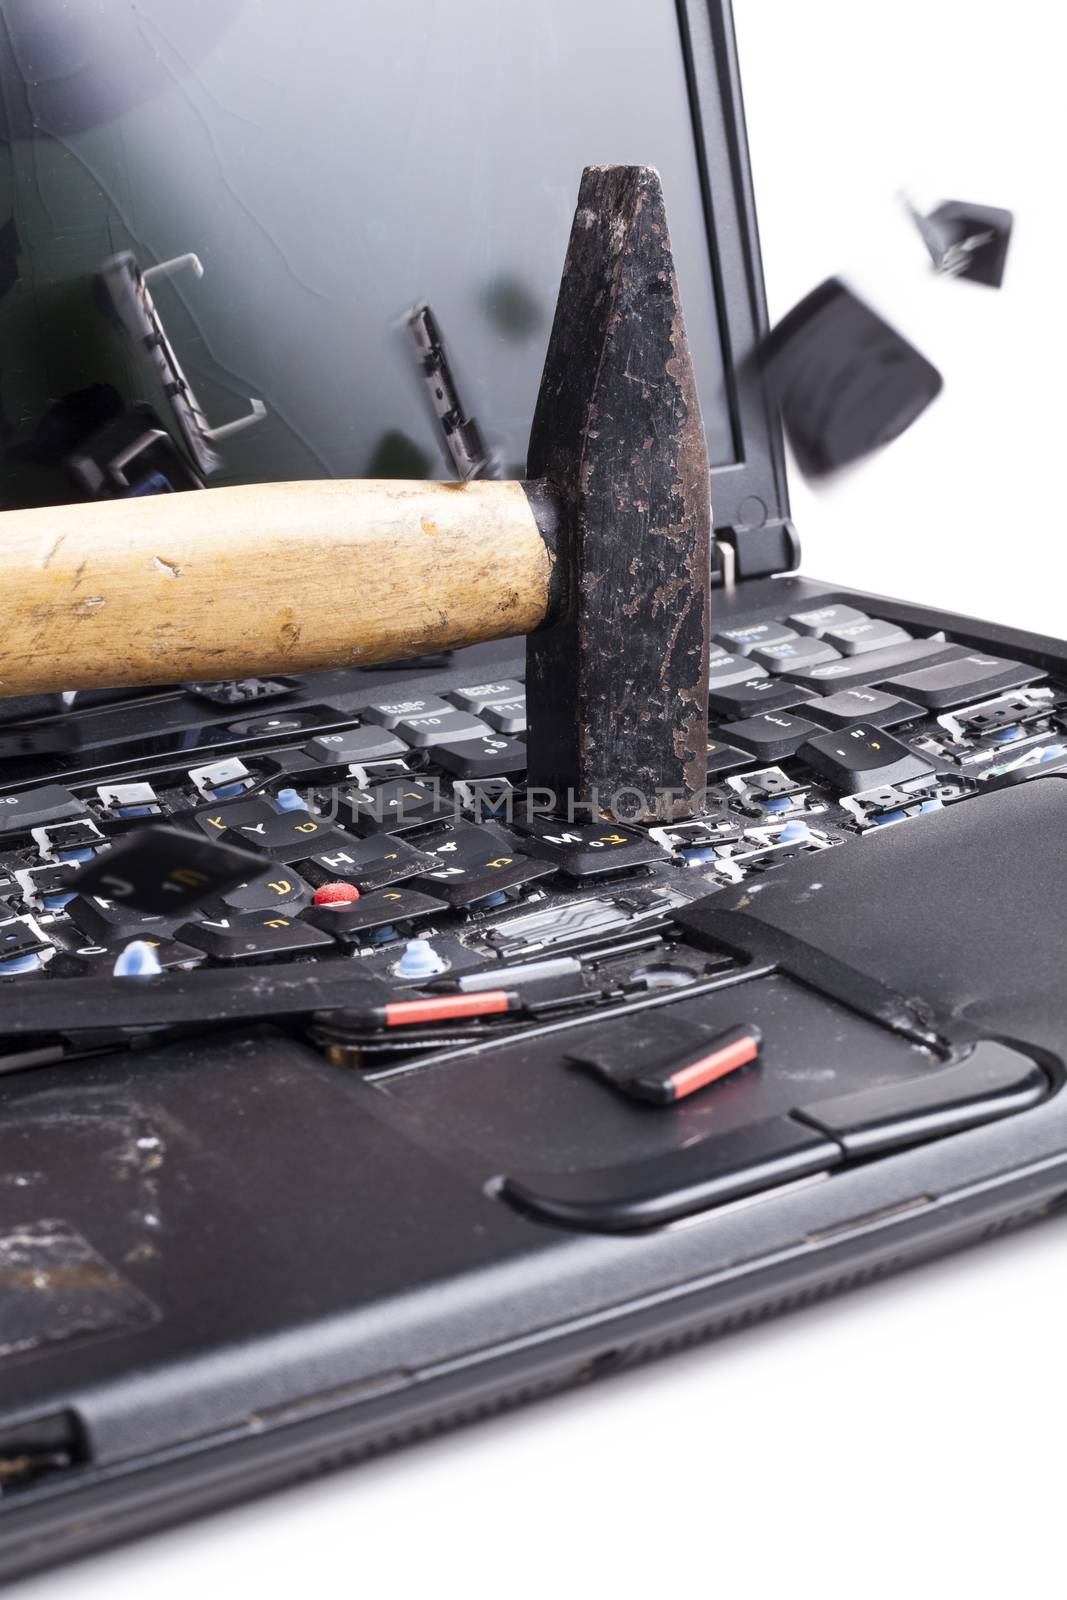 Smashing The Laptop by orcearo